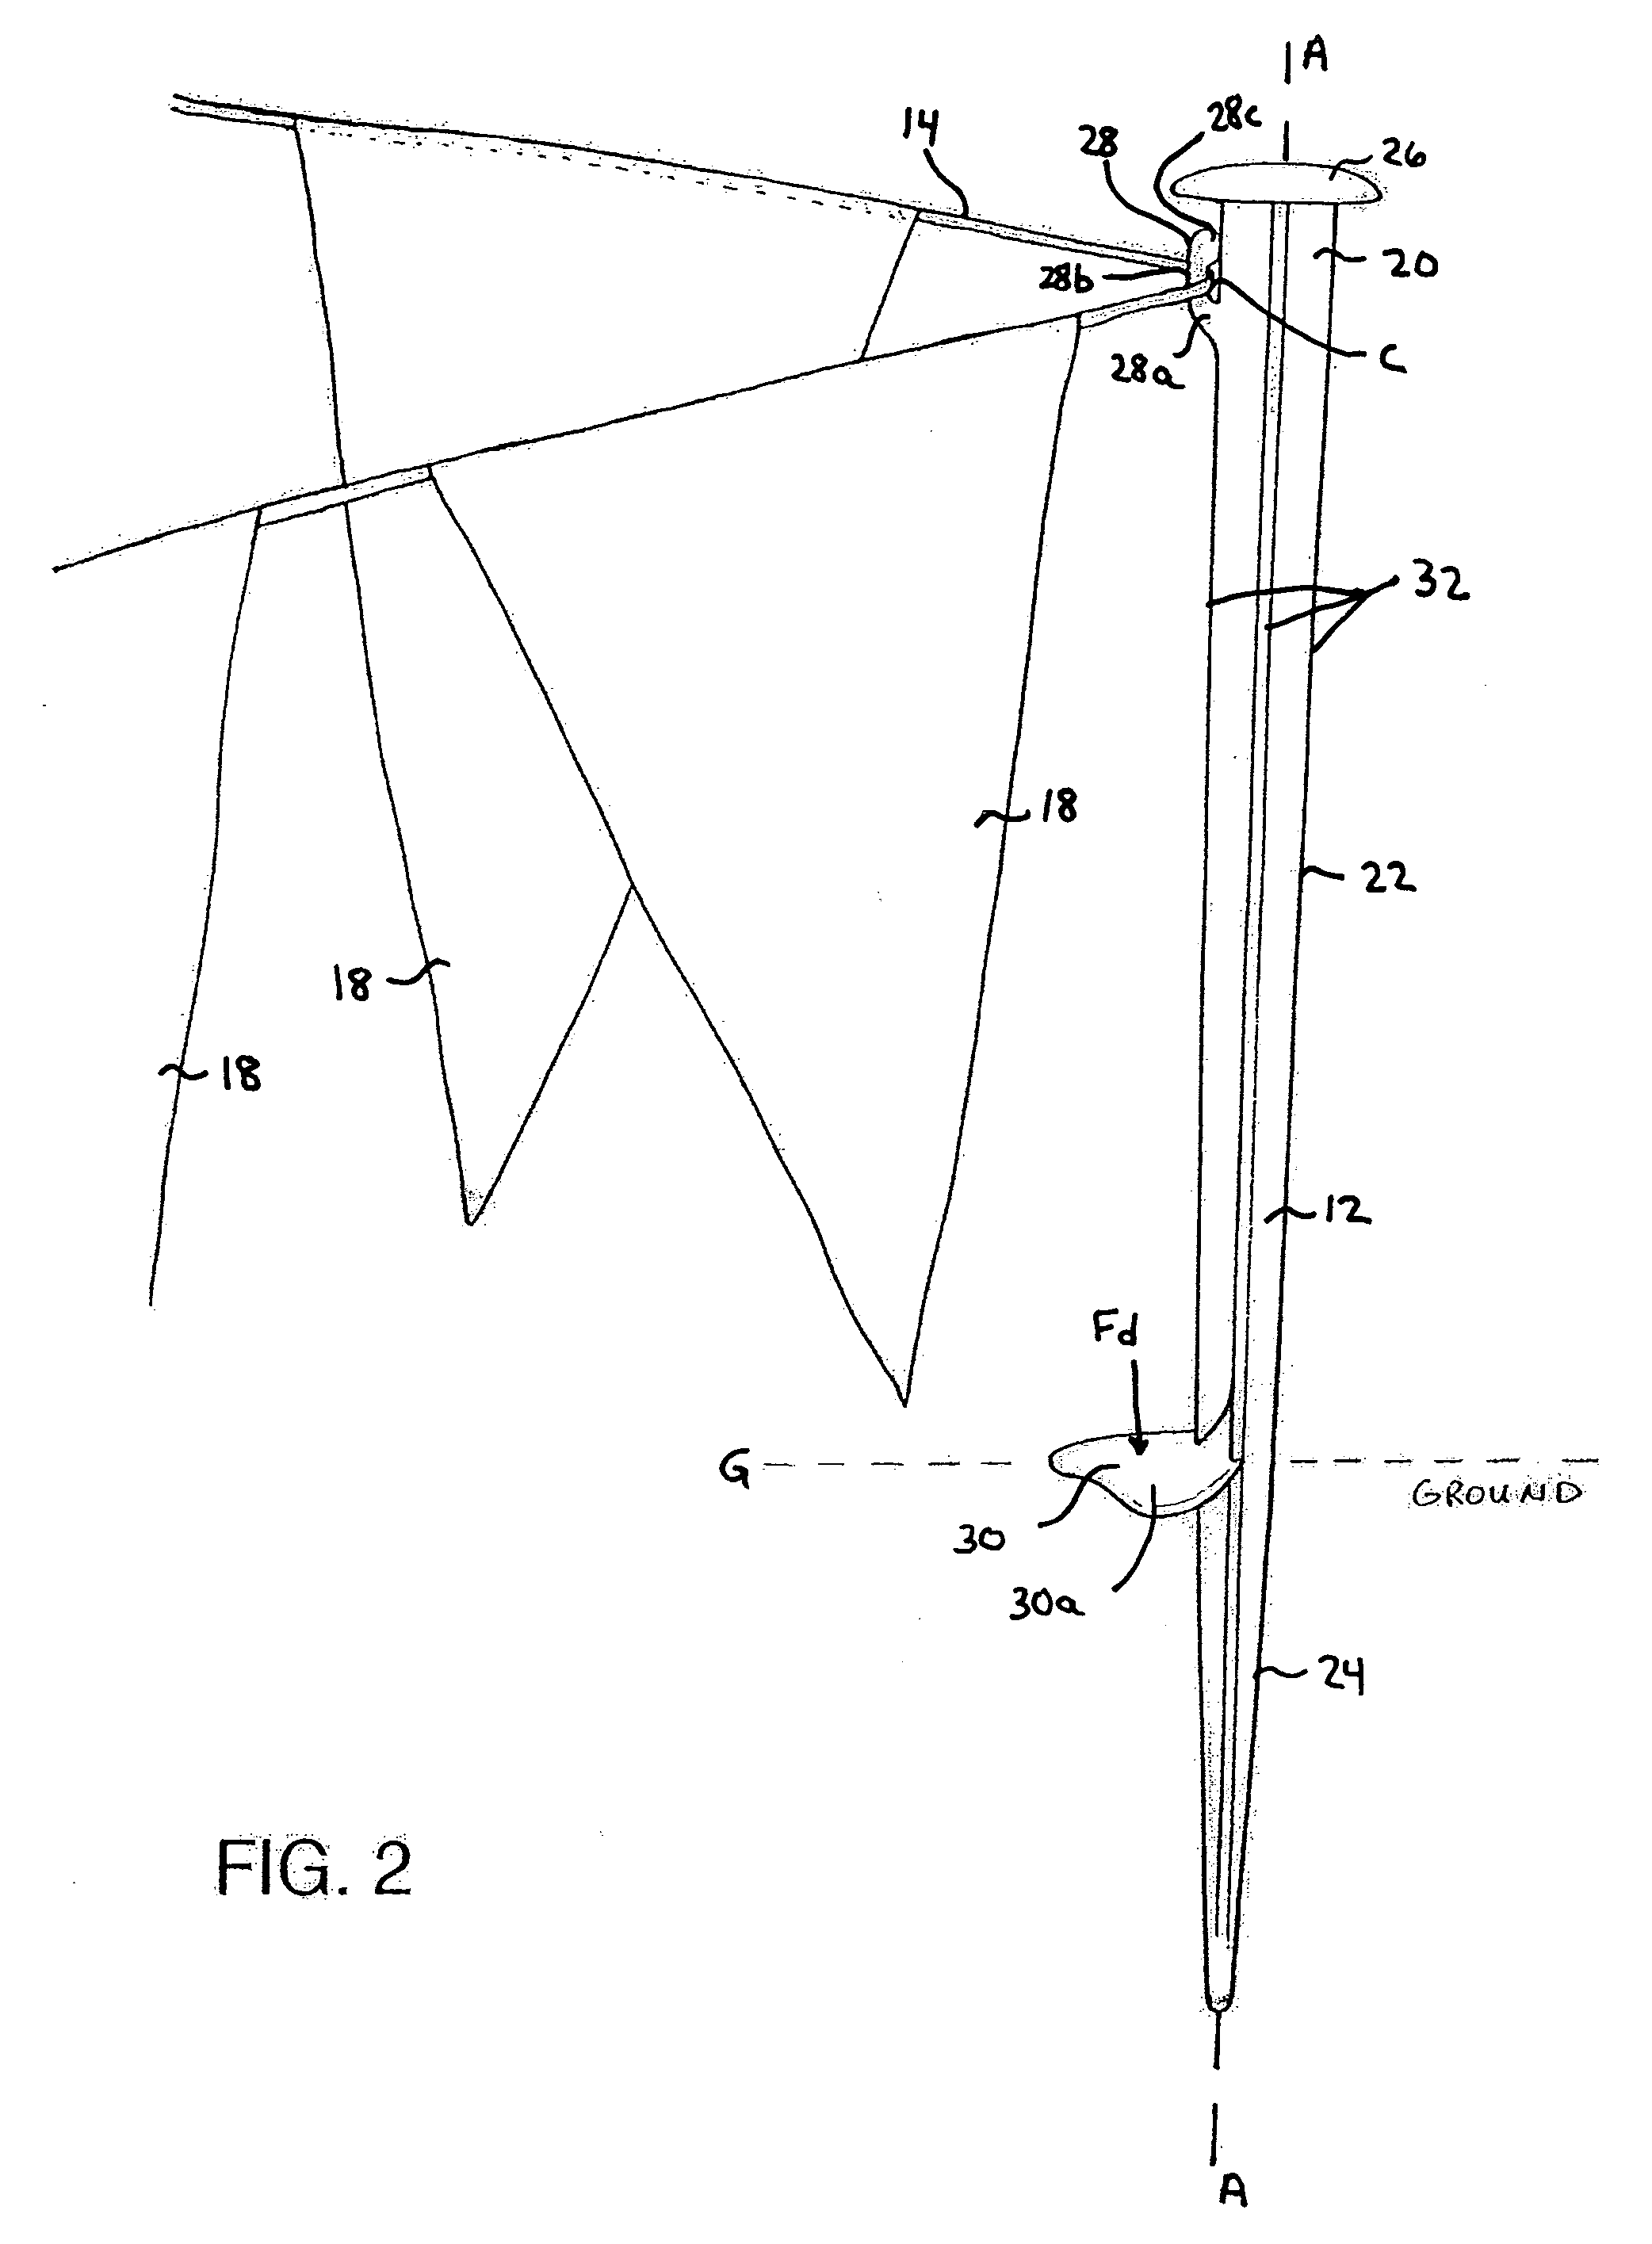 Portable apparatus for demarcating a region with respect to the ground